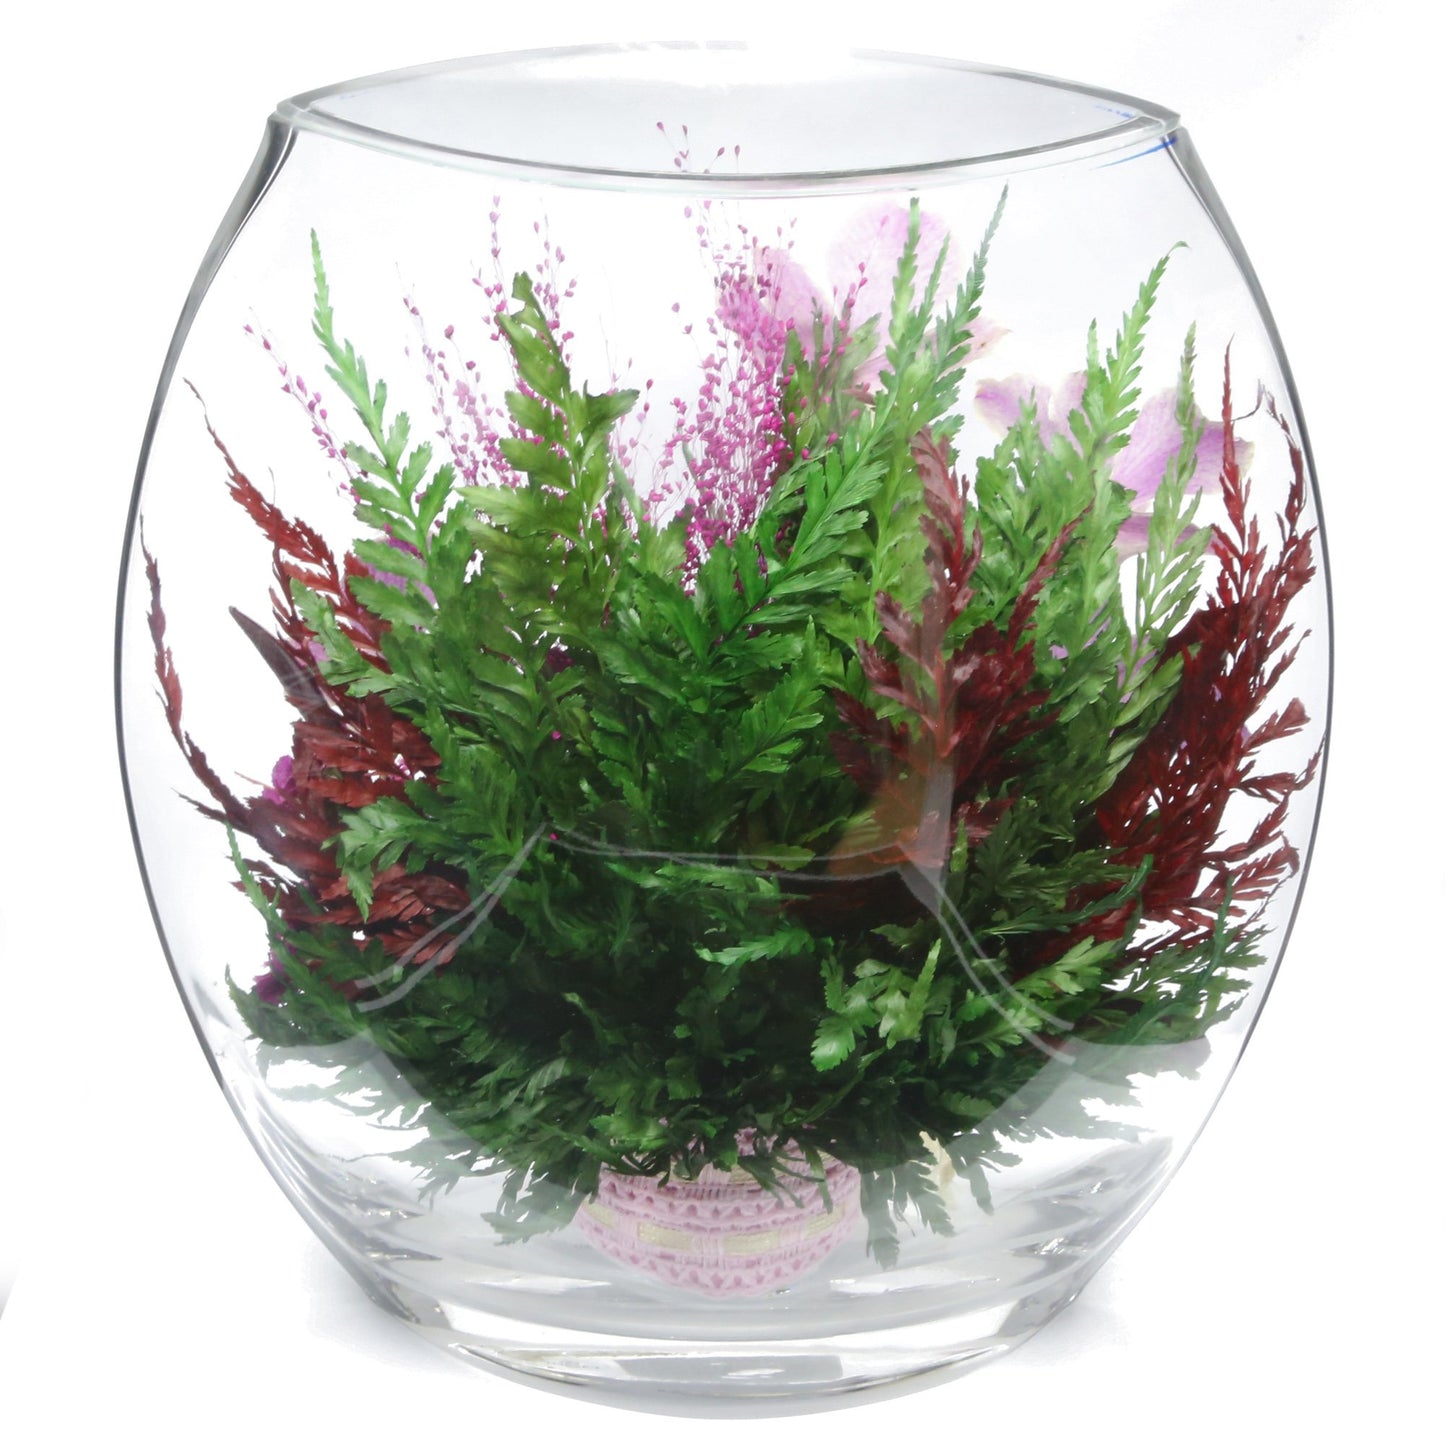 35753 Long-Lasting Purple Orchids,  Limoniums with Greenery in a Flat Rugby Glass Vase - FIORA FLOWER